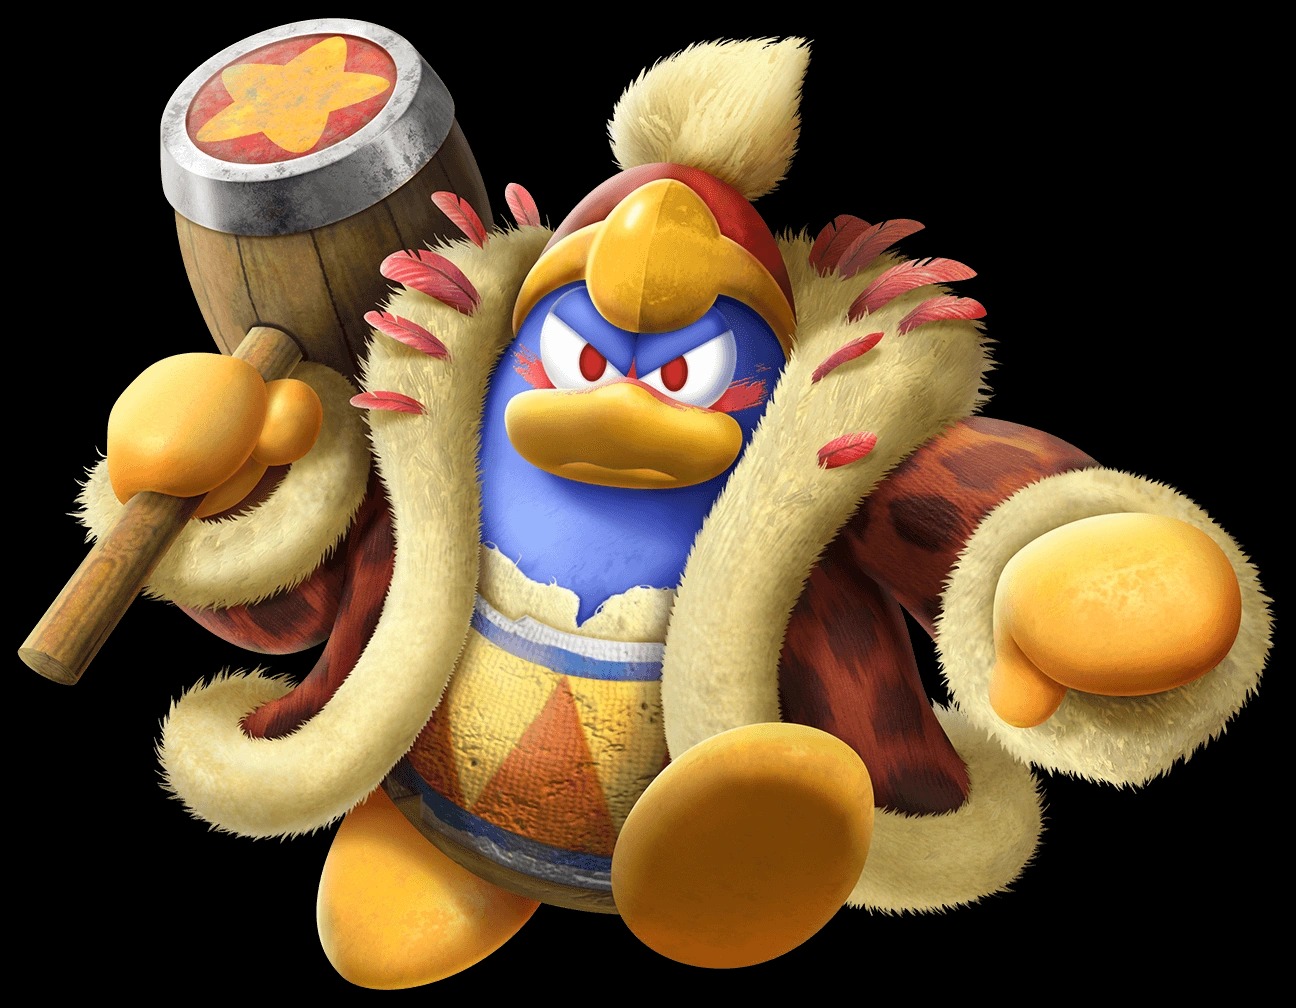 19-facts-about-king-dedede-kirby-right-back-at-ya